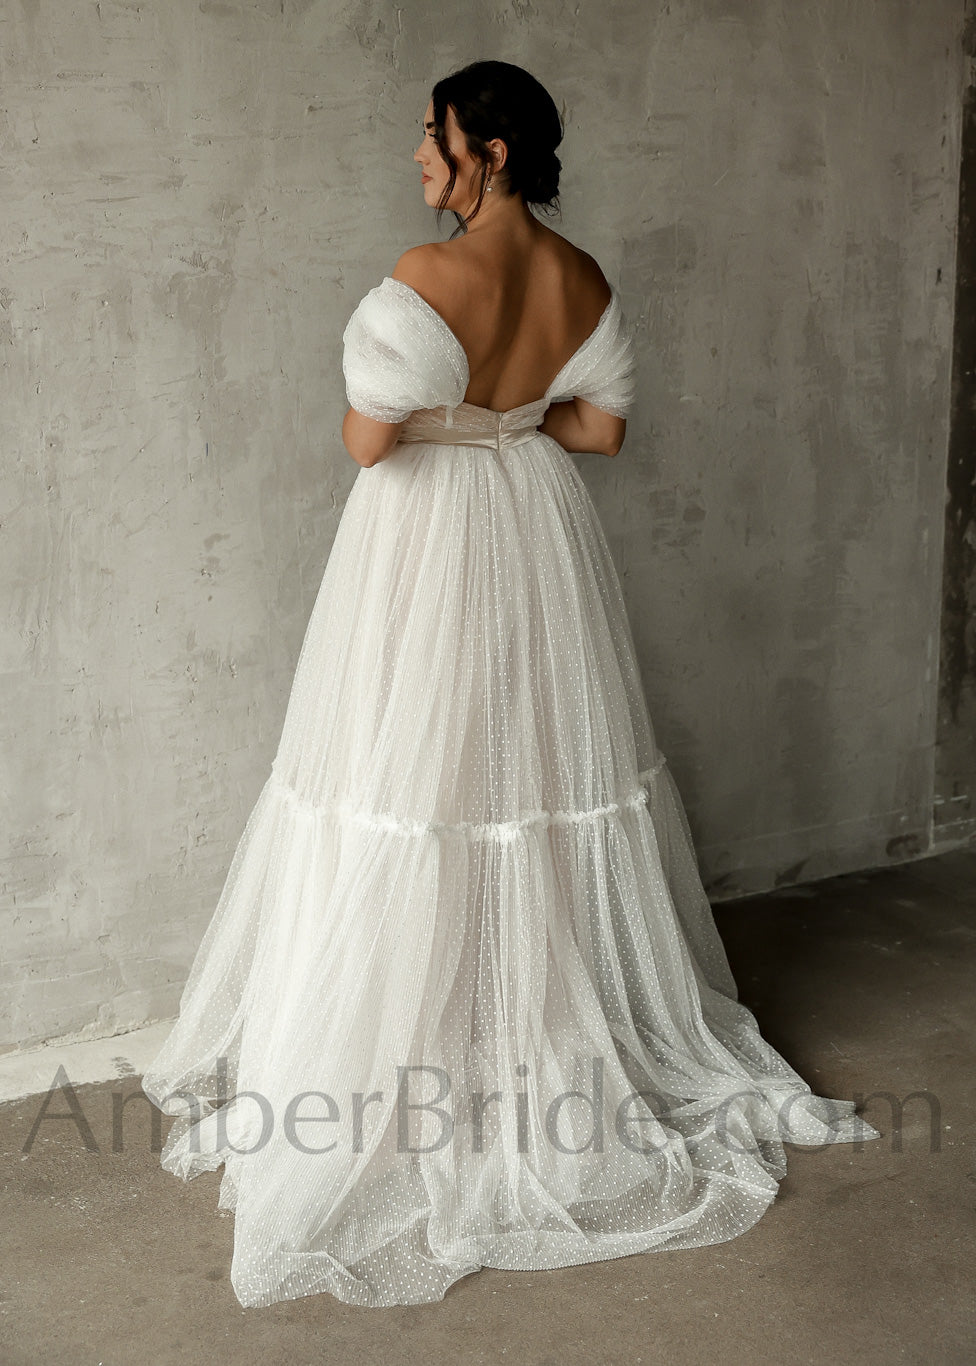 Rustic Ball Gown Country Style Off The Shoulder Tulle Wedding Dress - AmberBride